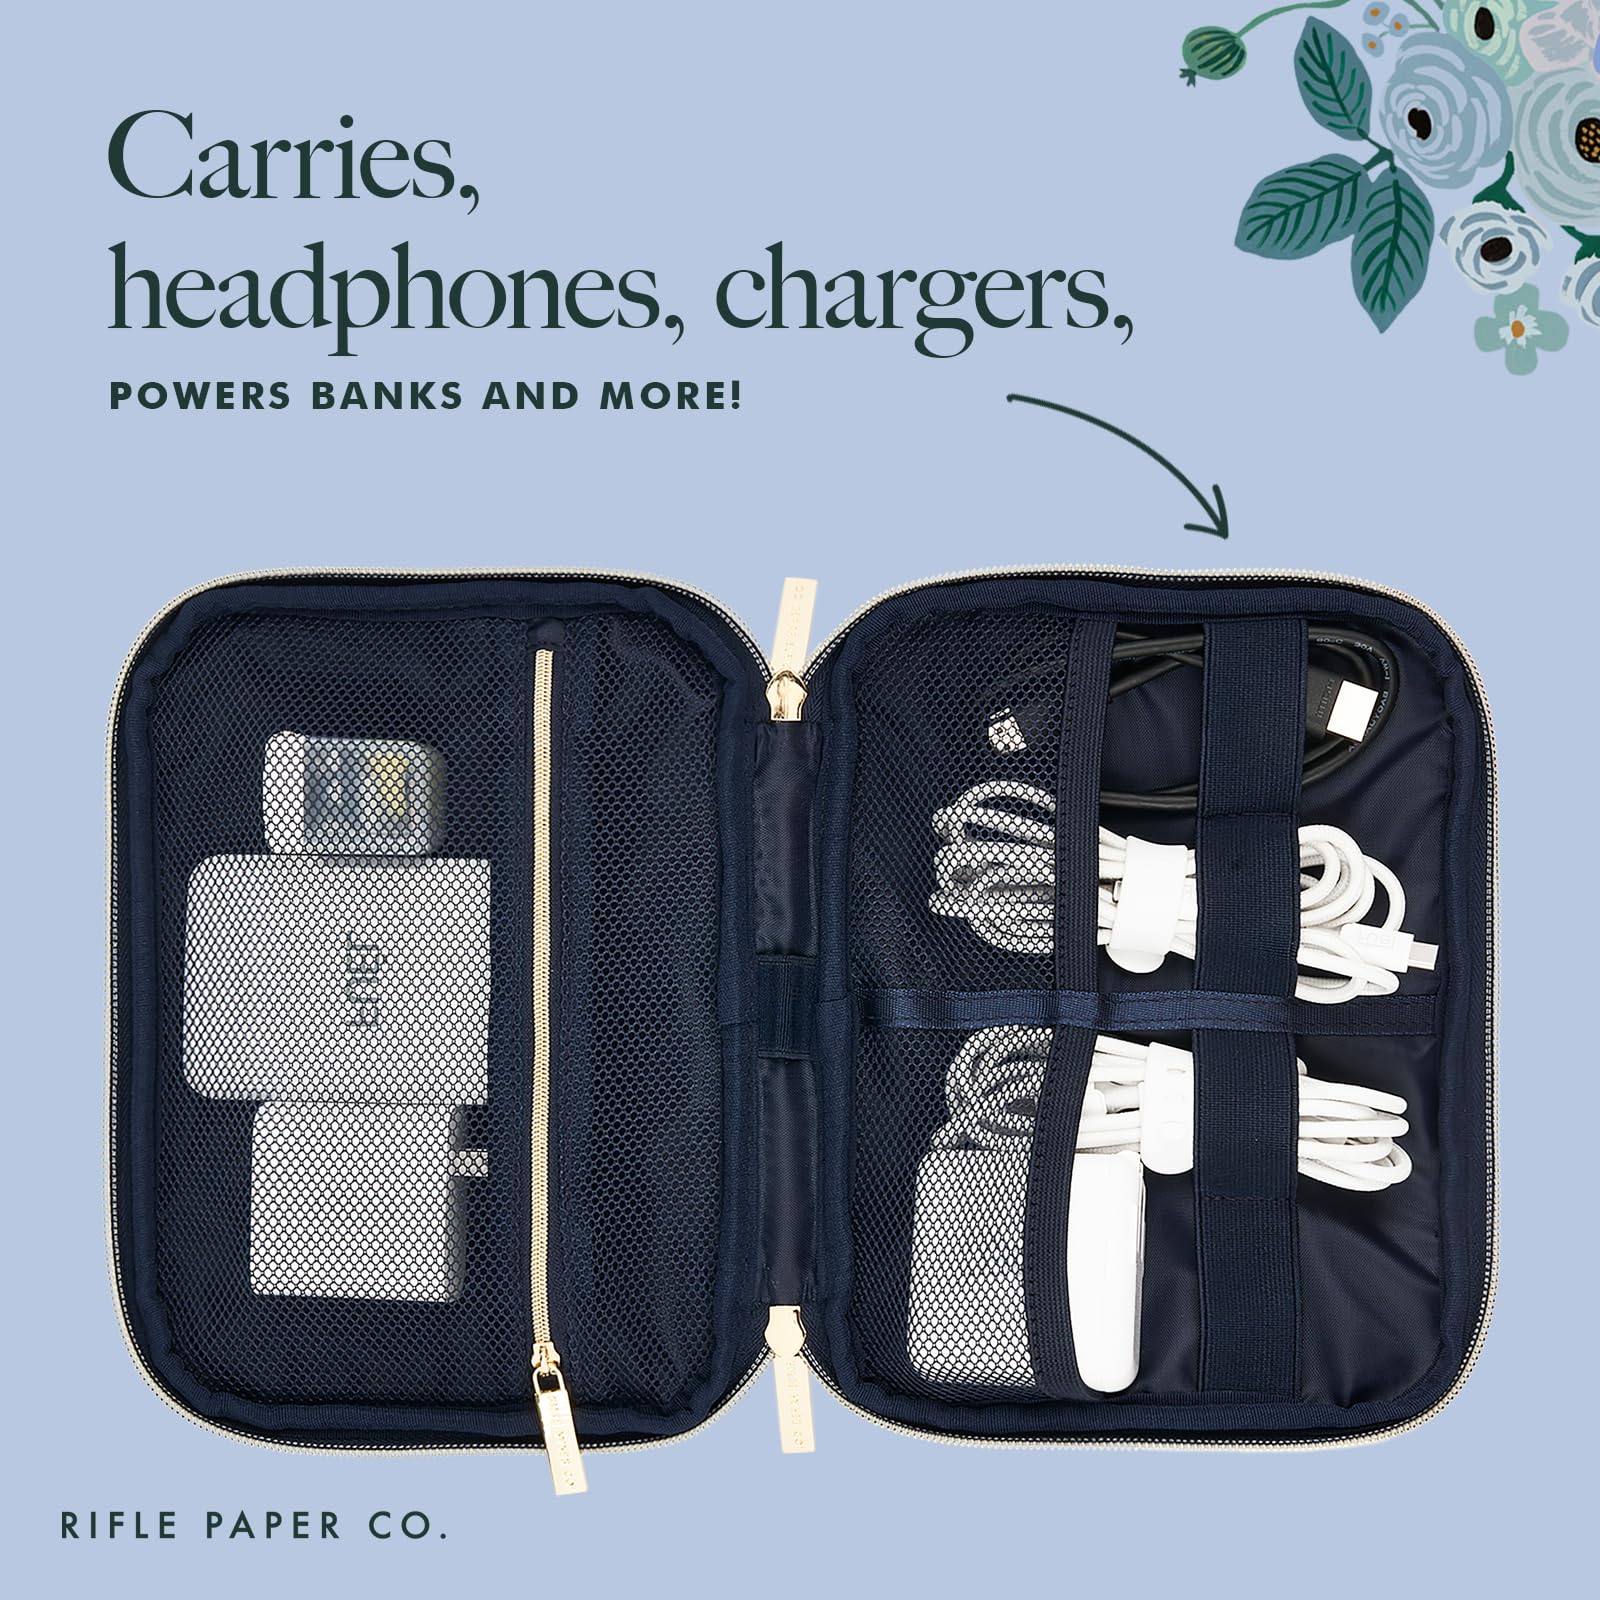 Rifle Paper Co. Electronic Organizer Travel Case - Portable Tech Pouch w/Multiple Storage Mesh Pockets for Cable, Cord, Charger, Power Bank, AirPods - Airplane Travel Essentials Bag -Garden Party Blue